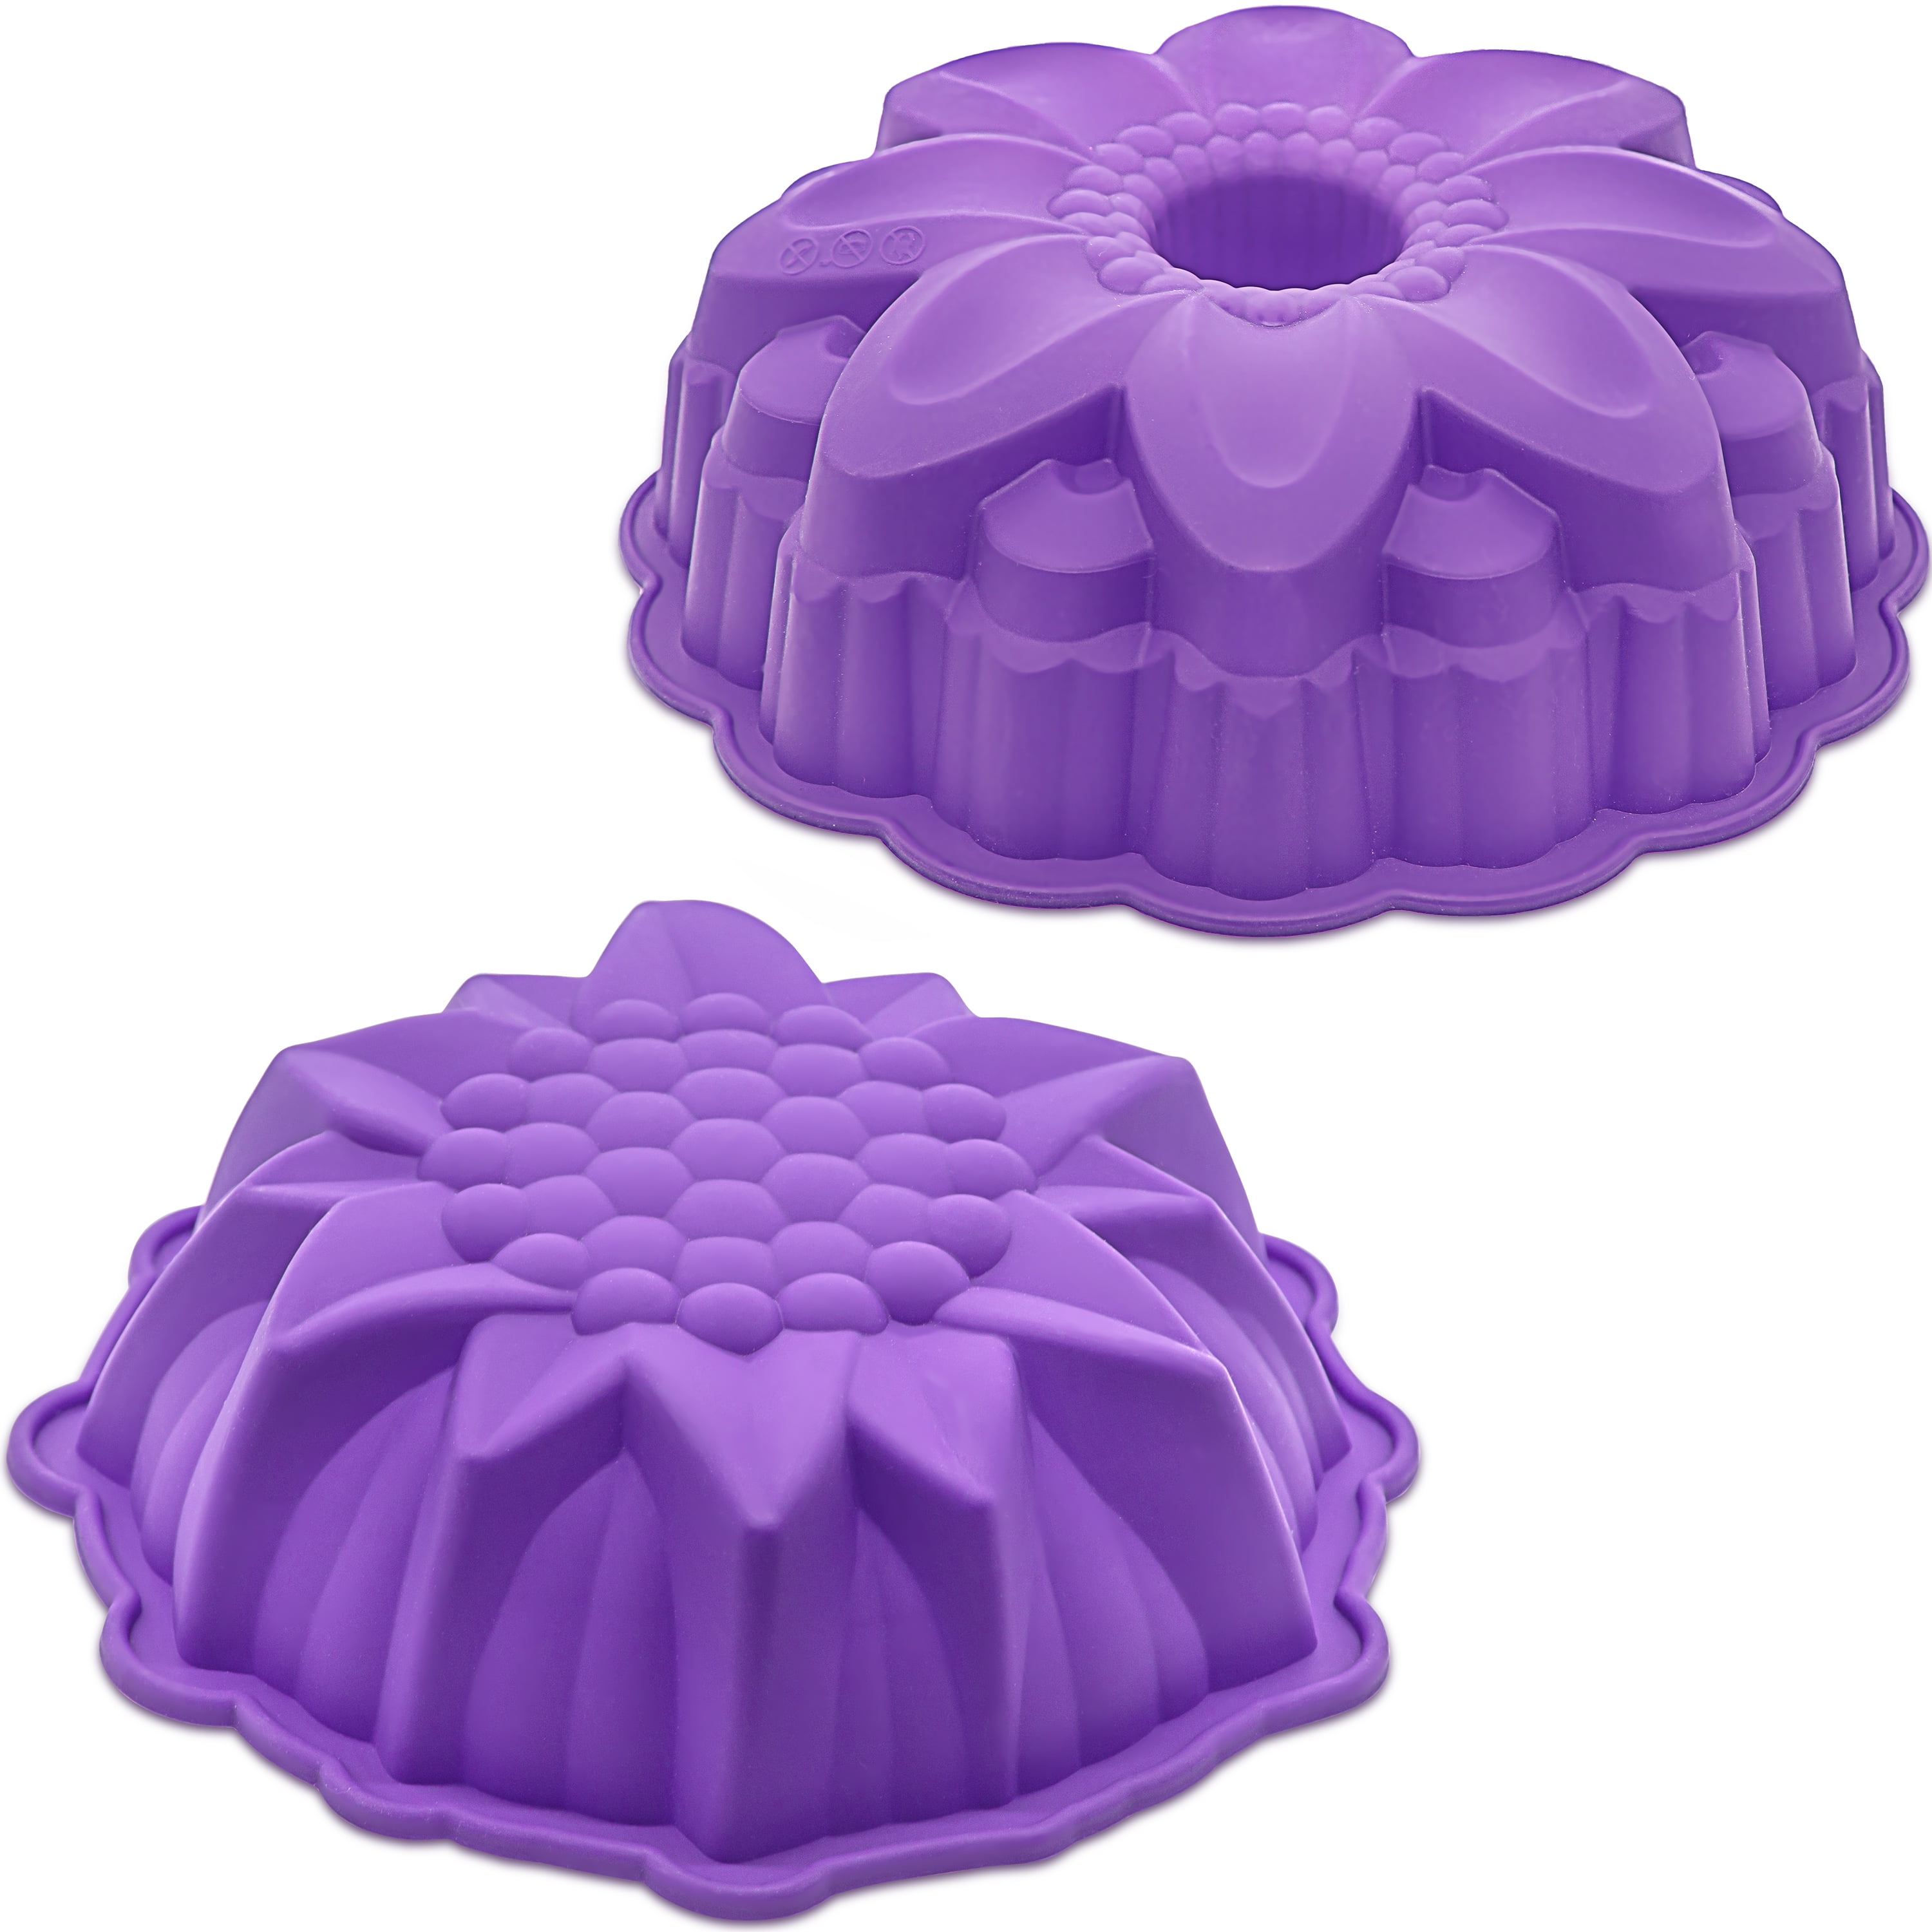 BAKER DEPOT 2 Pack Swirl Silicone Fluted Cake Pans for Baking 8